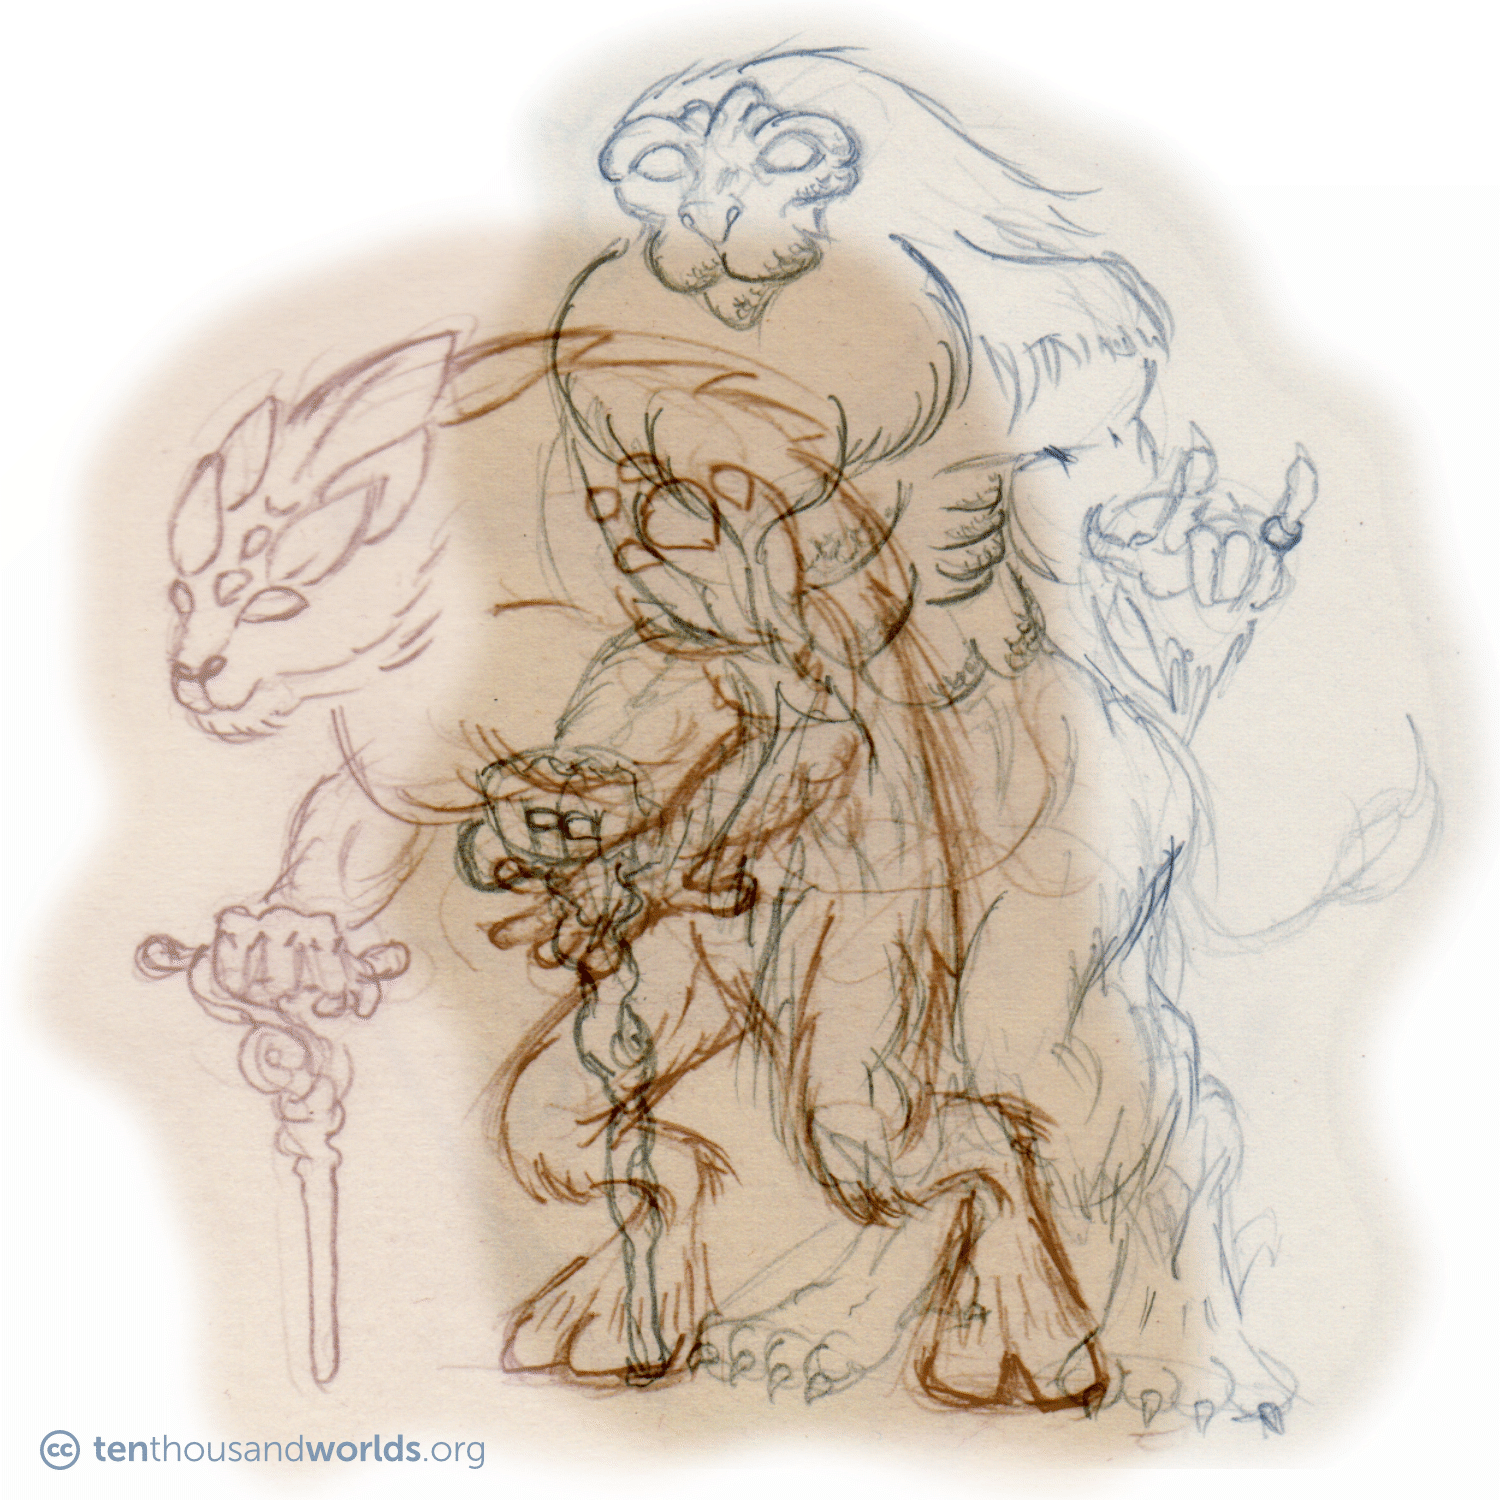 A pair of overlapping pencil sketches of a furry, humanoid being leaning on a gnarled staff. In one, the face has an almost feline muzzle; In an other, the face goes more simian. Experiments with armored plates, tails, hooves versus paws, and numbers of fingers are found throughout the sketches.